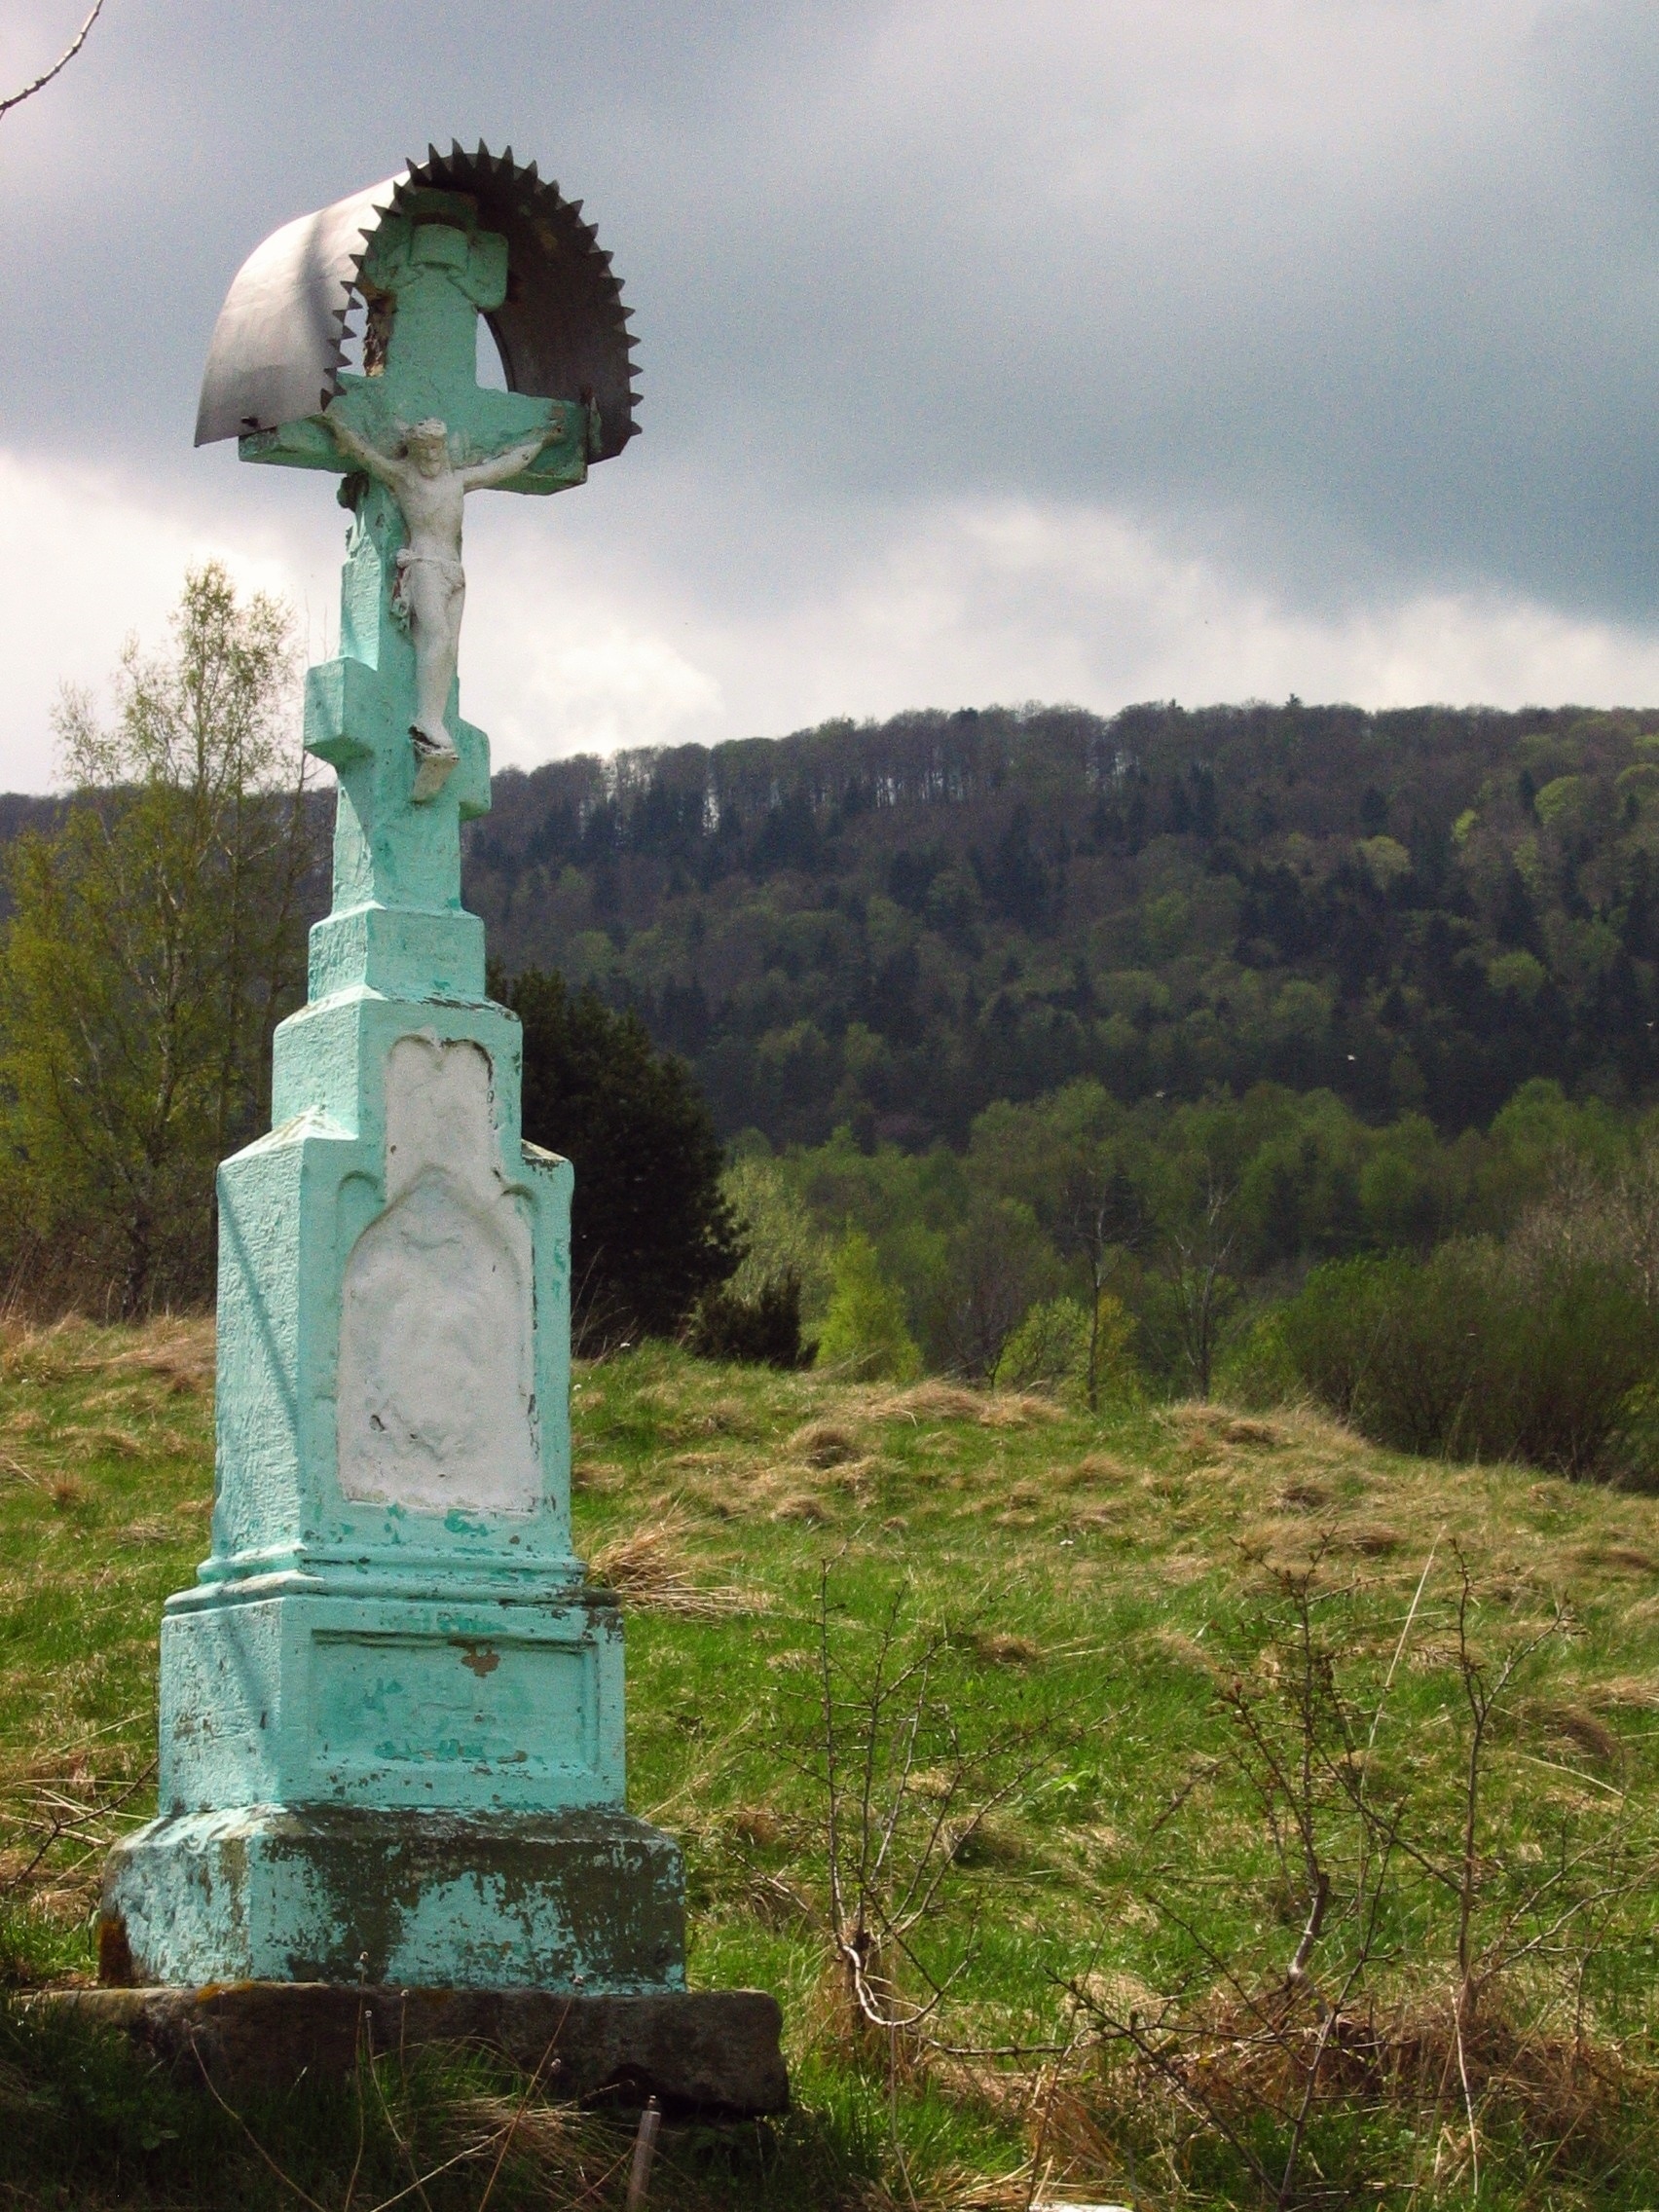 teal and white crucifix statue